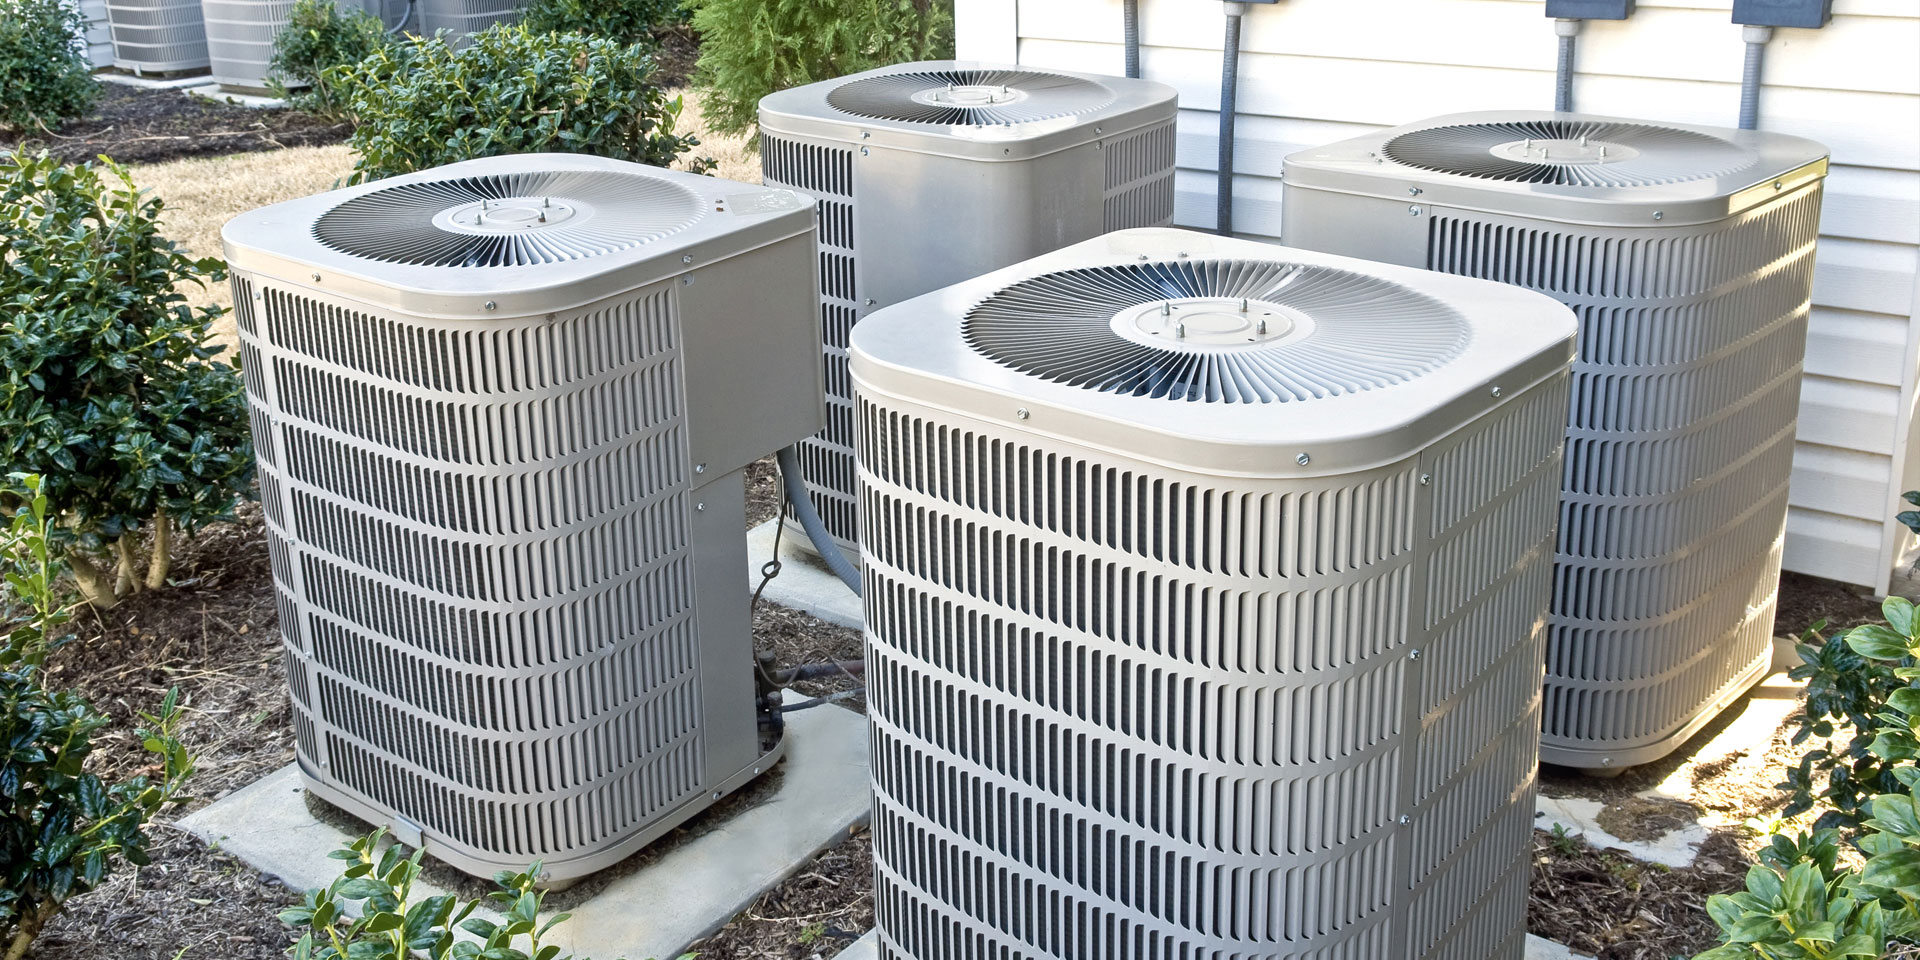 How much does a new Bryant air conditioner cost in 2020?